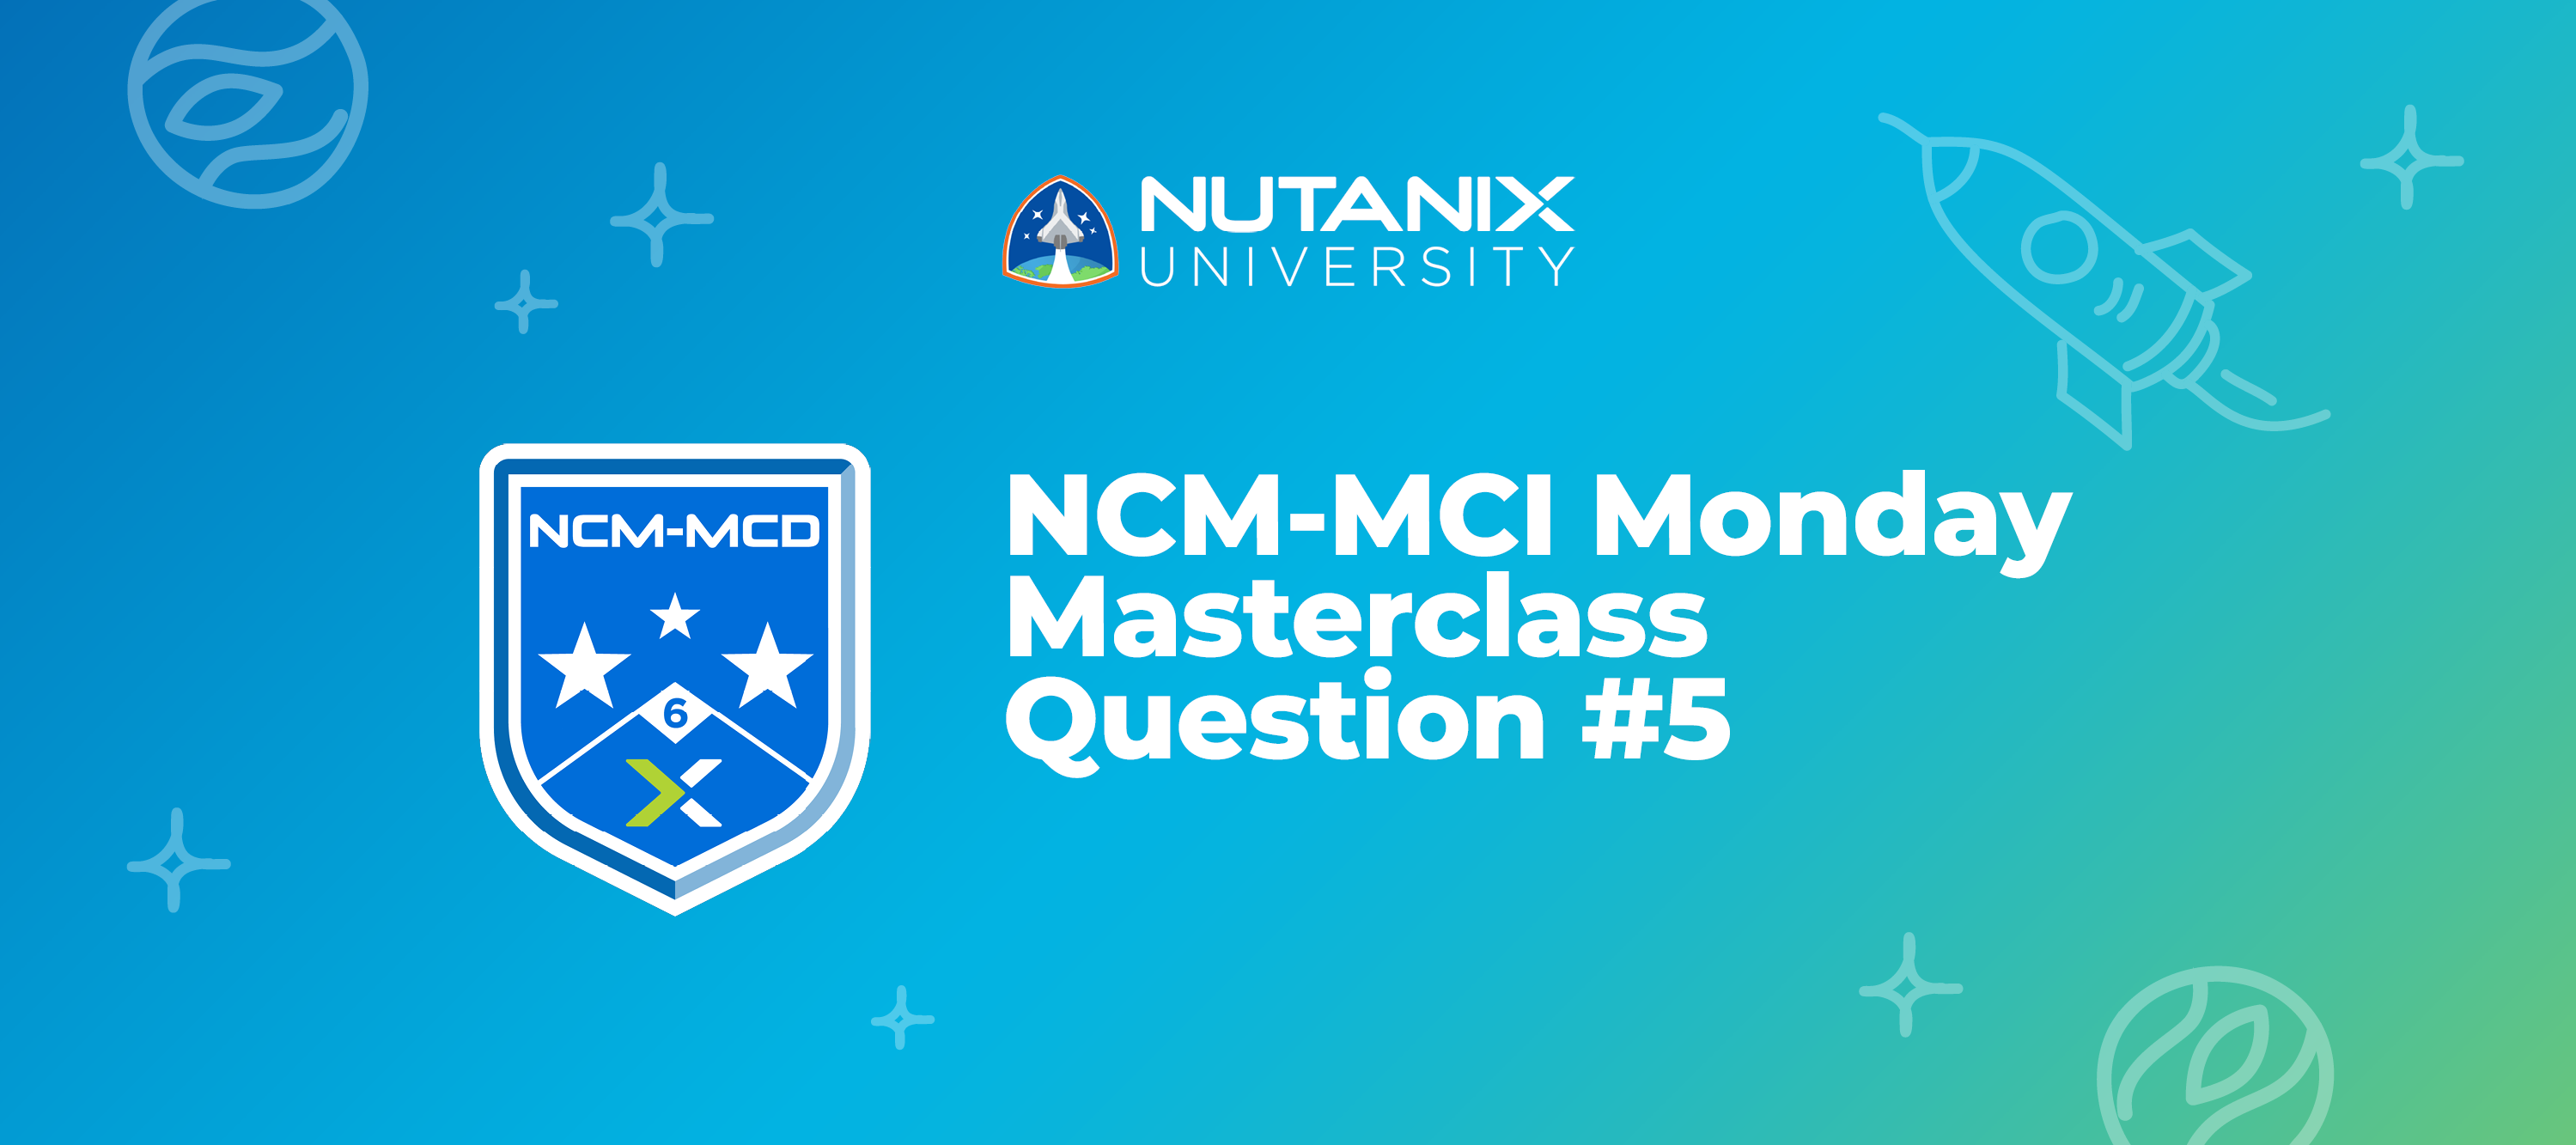 [Giveaway Alert] Time for Another Monday Masterclass NCM Question!